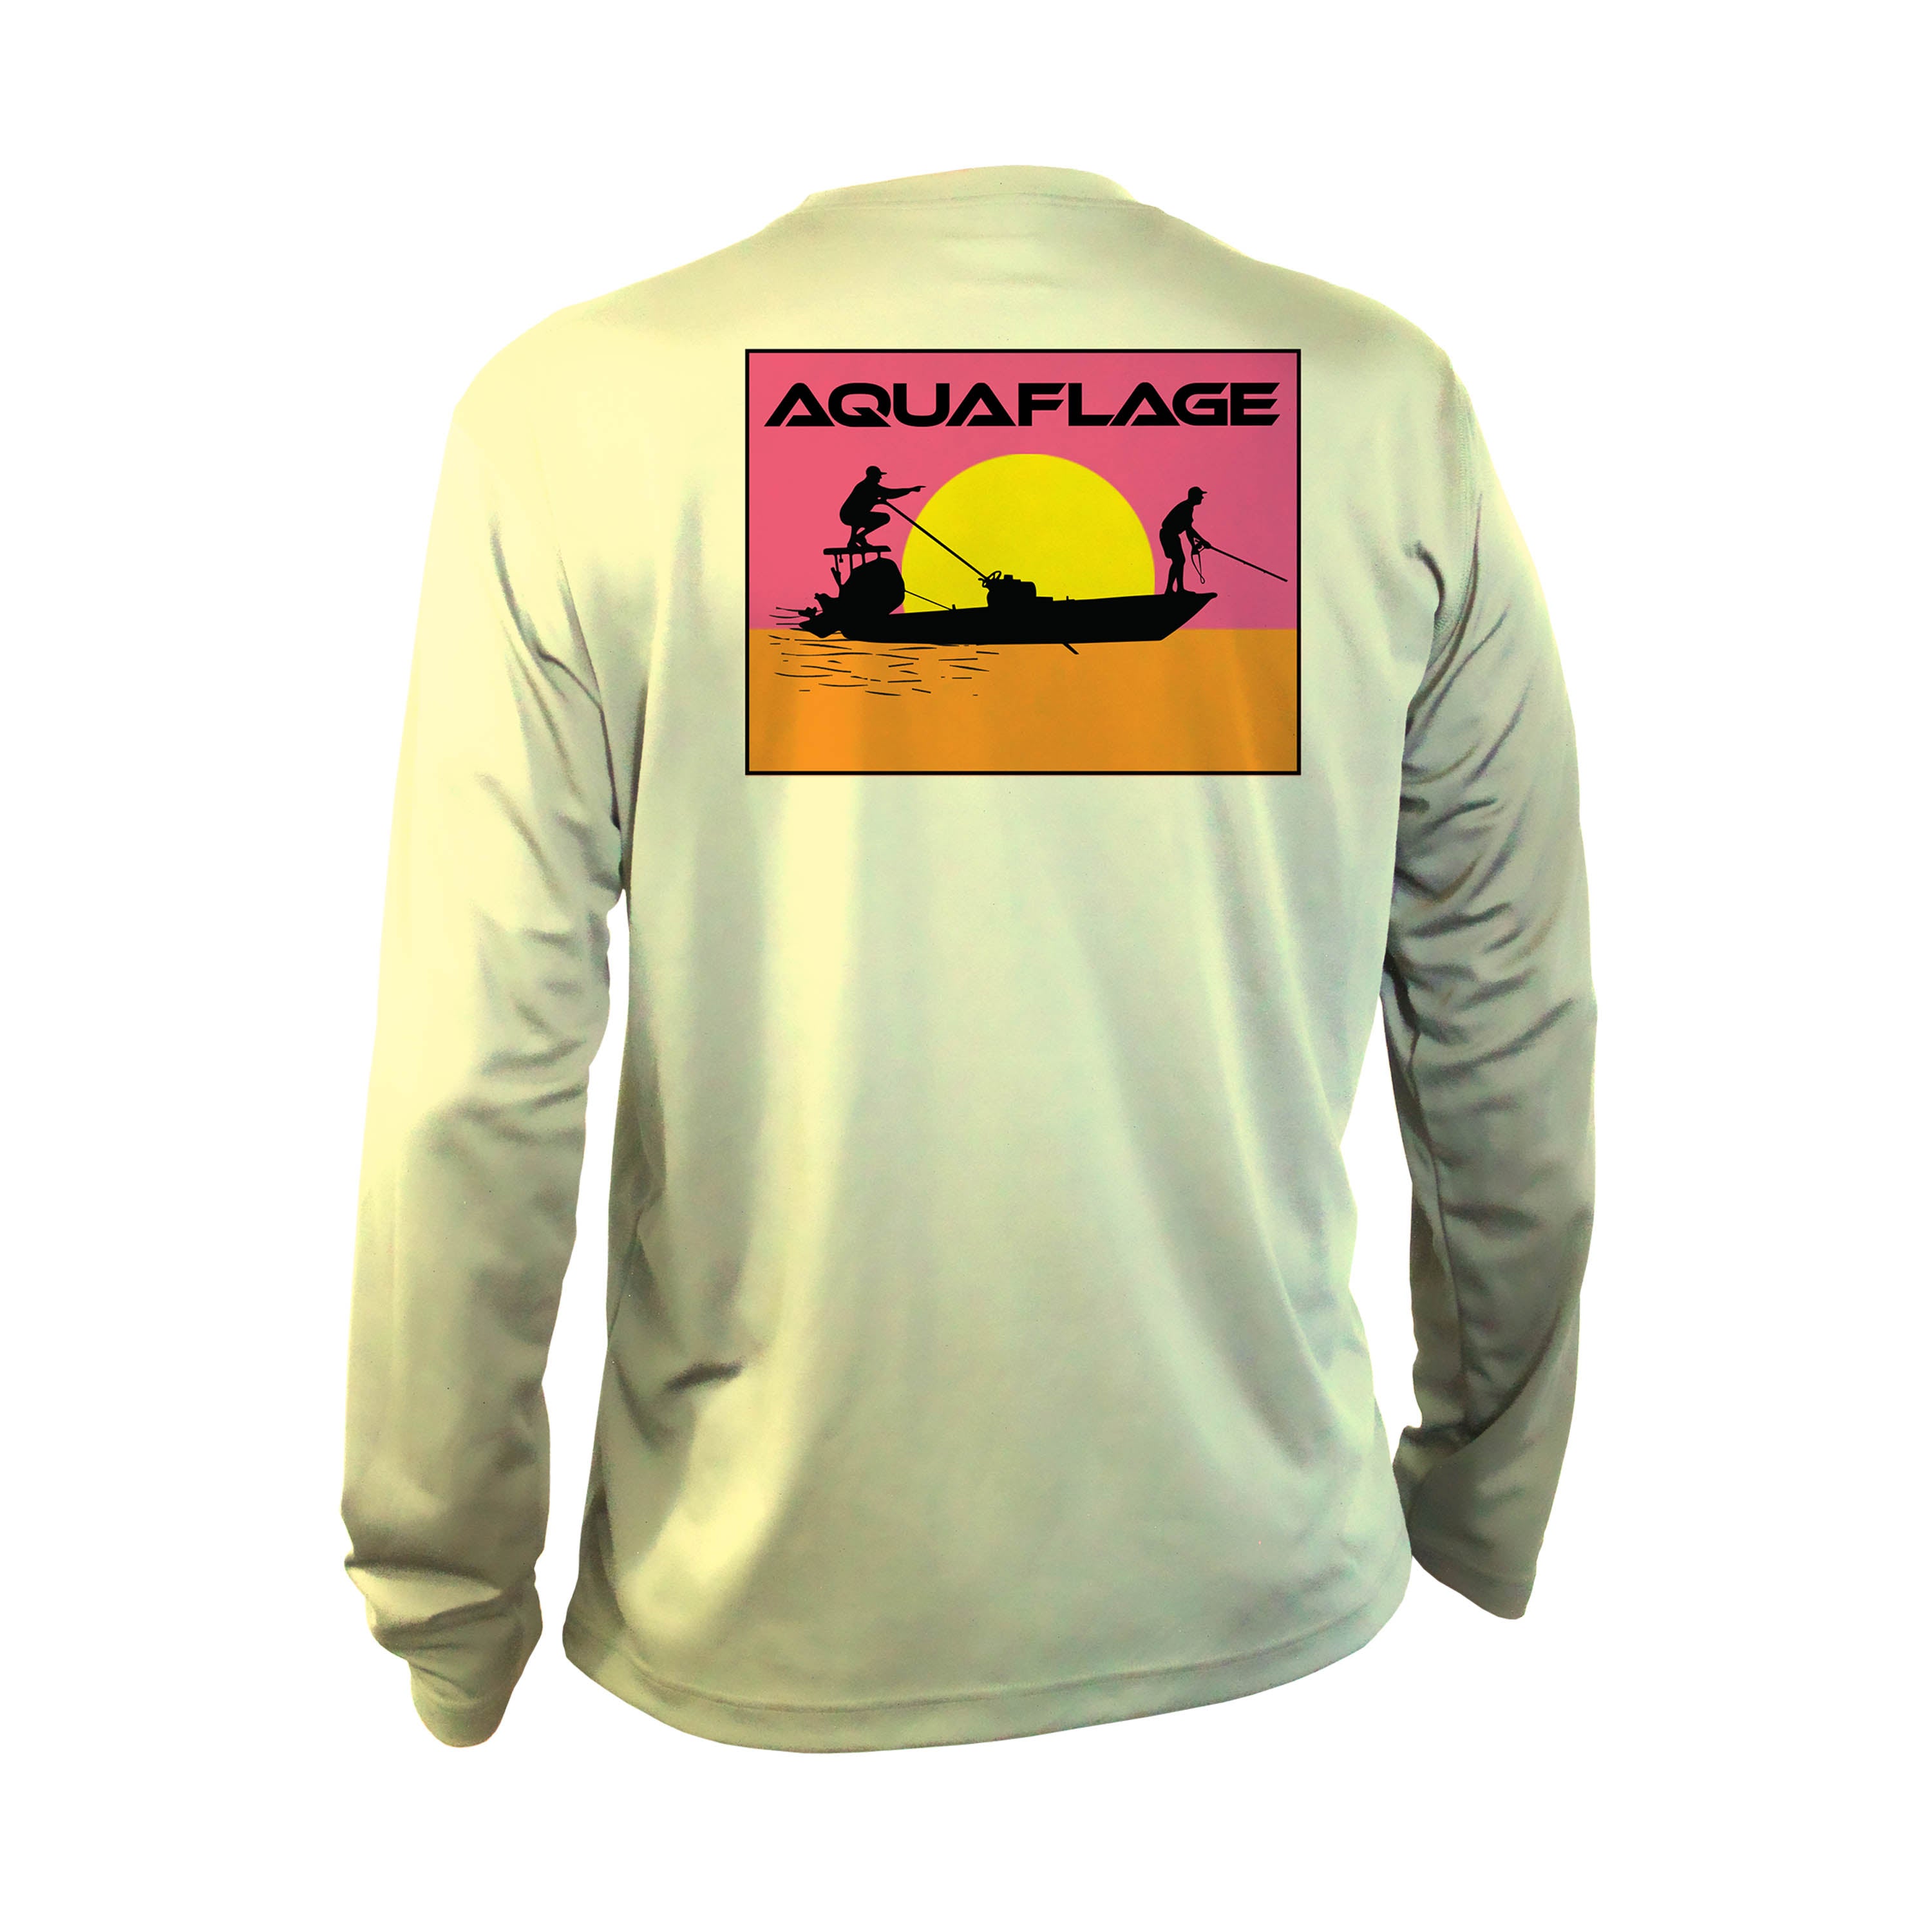 Sea Fear Men's Fishing Shirt - Vibrant Colors, Moisture Wicking, Quick  Drying, Sun Protection - Octopus Dive Flag Graphic Long Sleeve Beach Shirt